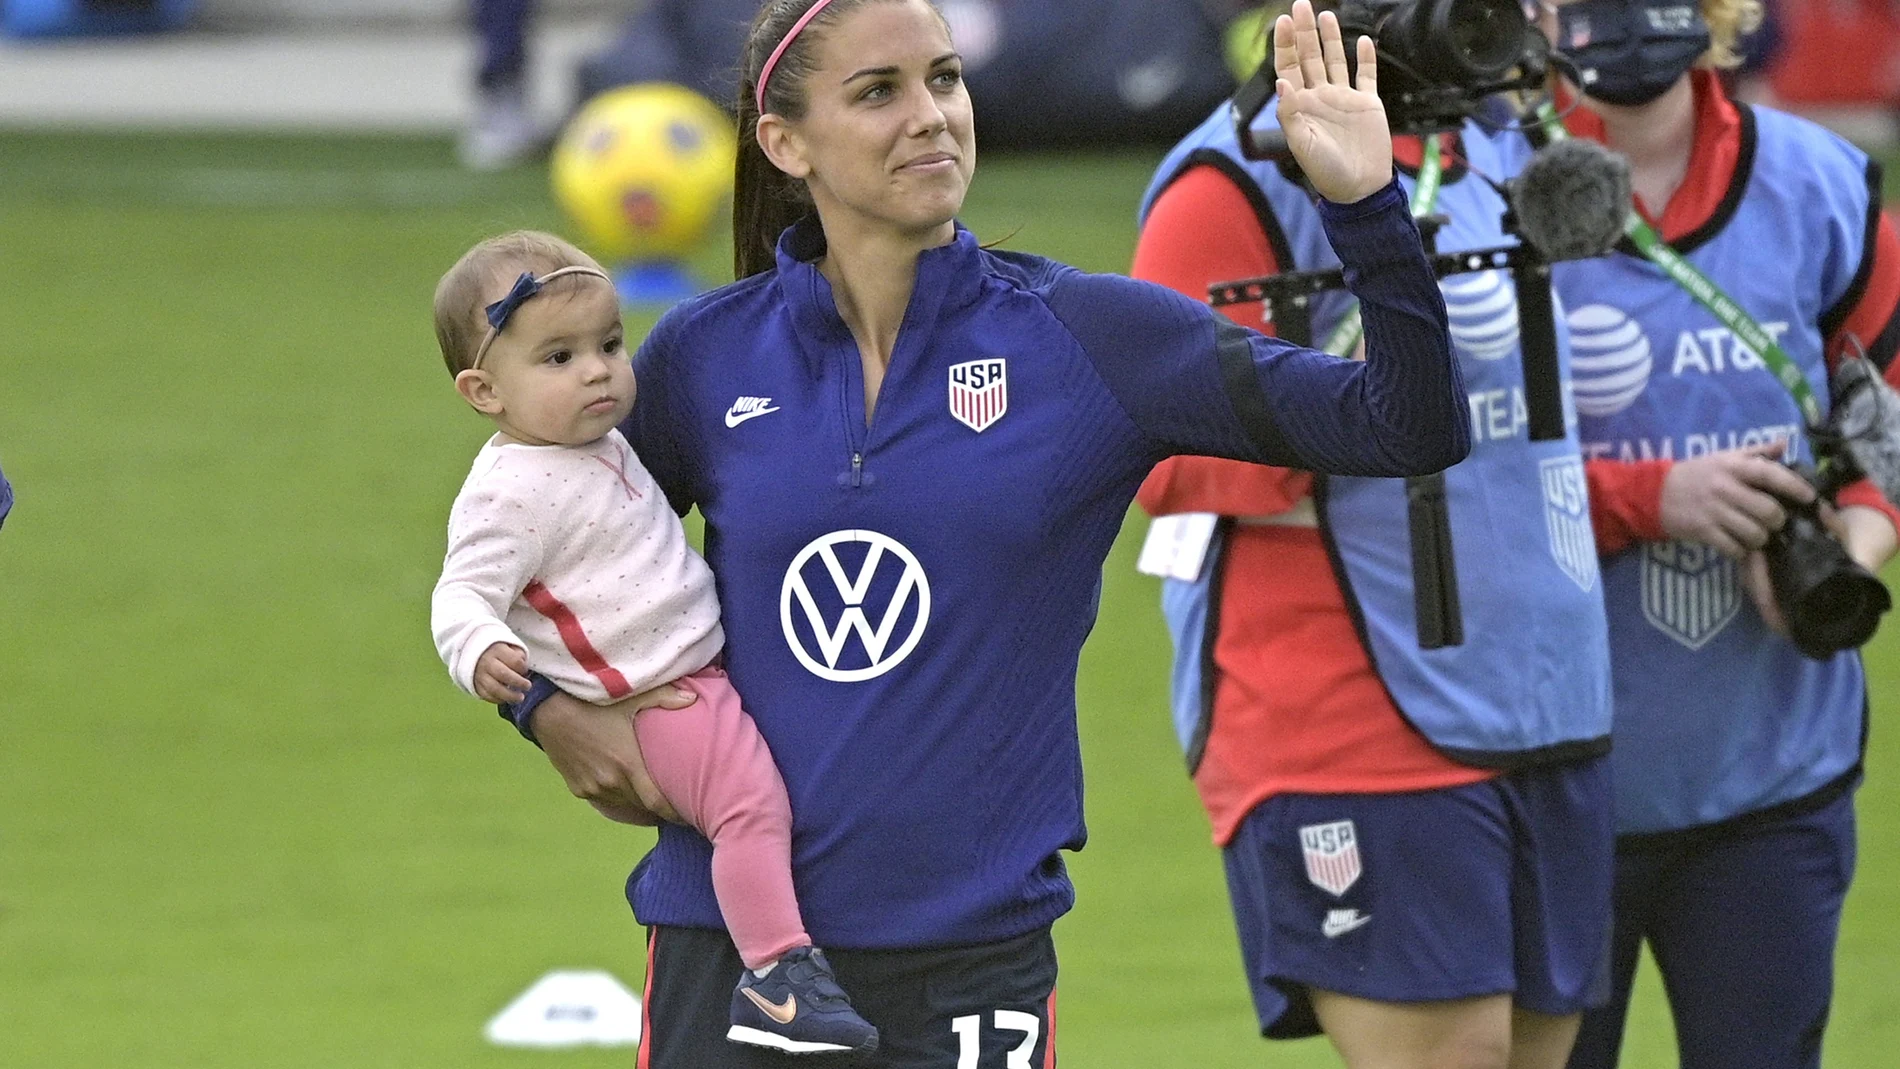 United States forward Alex Morgan (13) waves to fans in the stands while holding her daughter Charlie Elena Carrasco after a SheBelieves Cup women's soccer match against Brazil, Sunday, Feb. 21, 2021, in Orlando, Fla. (AP Photo/Phelan M. Ebenhack)